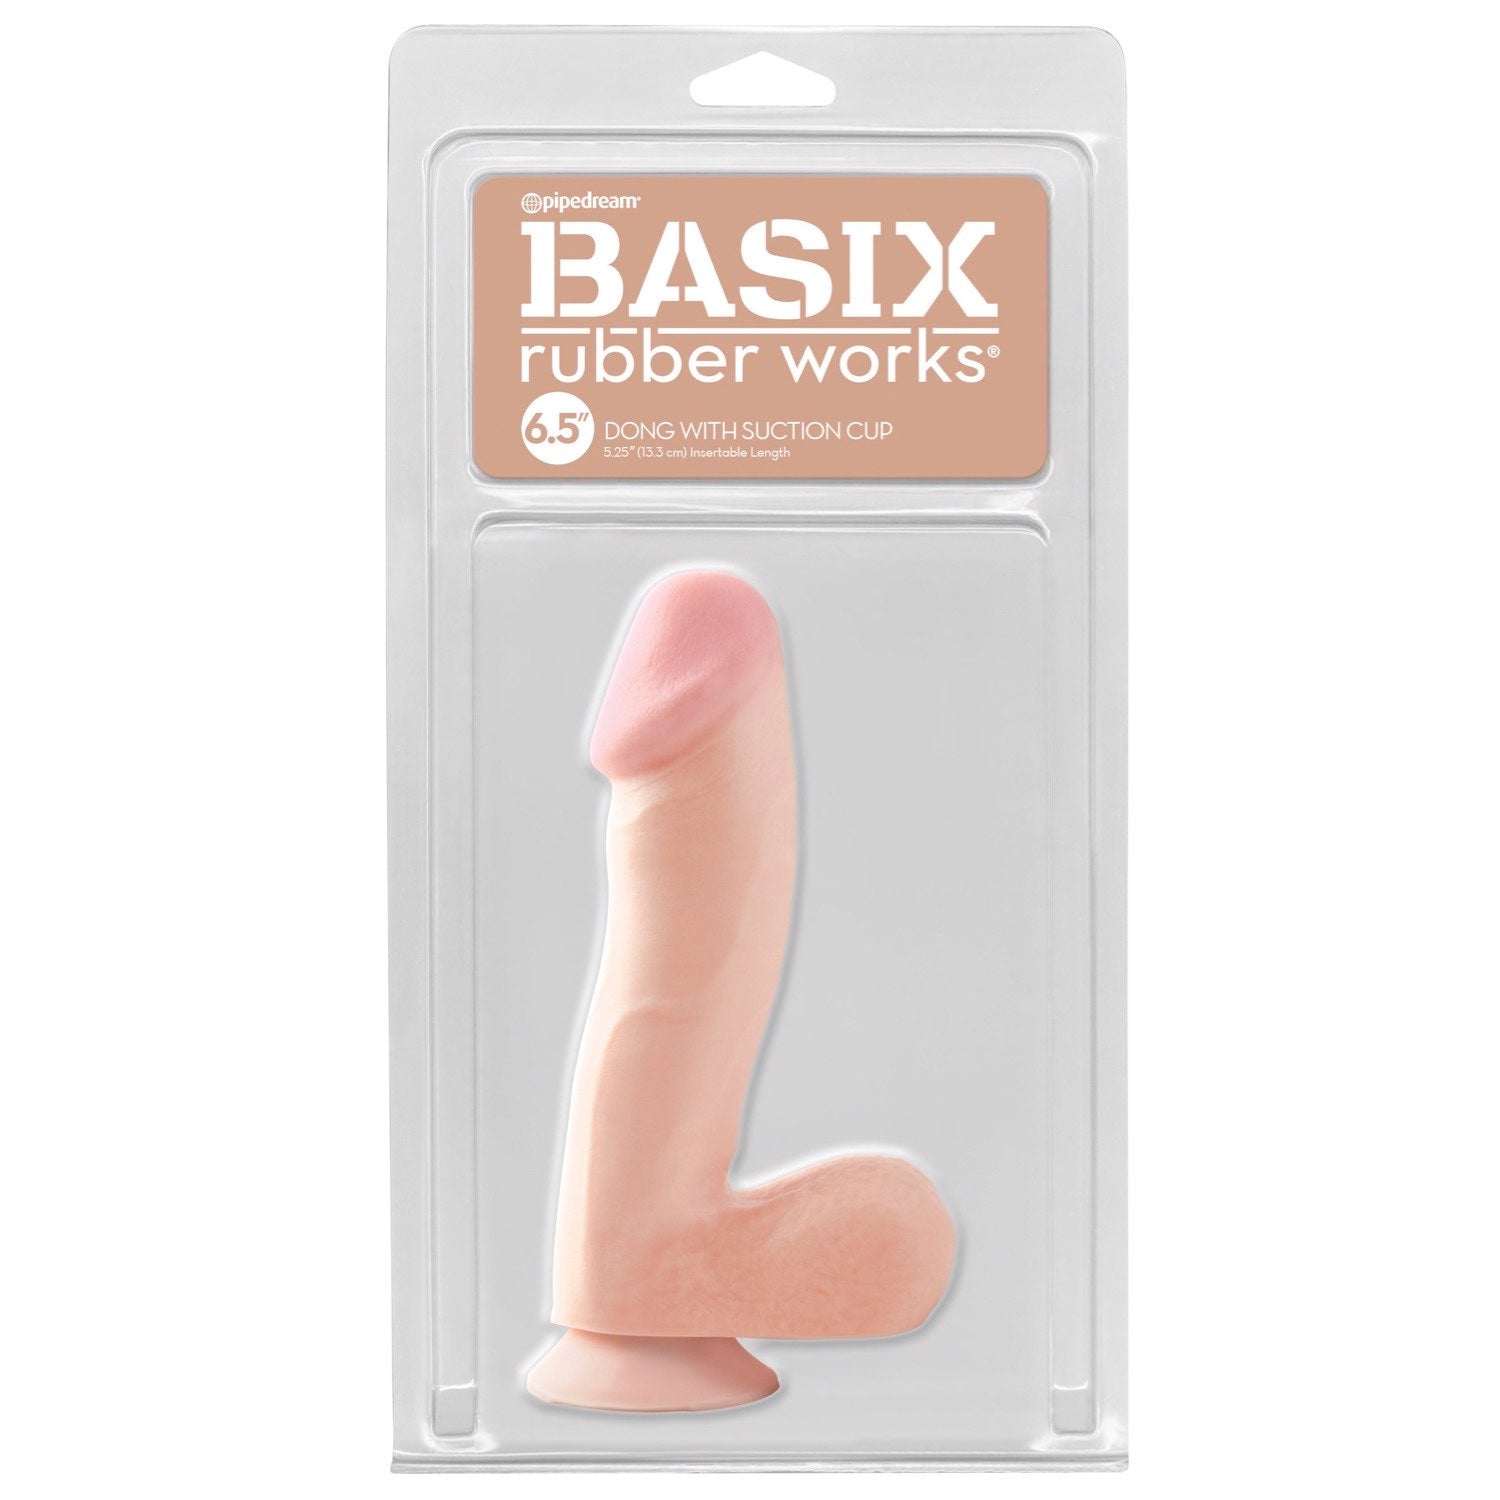 Basix Rubber Works 6.5&quot; Dong with Suction Cup - Flesh 16.5 cm (6.5&quot;) Dong by Pipedream